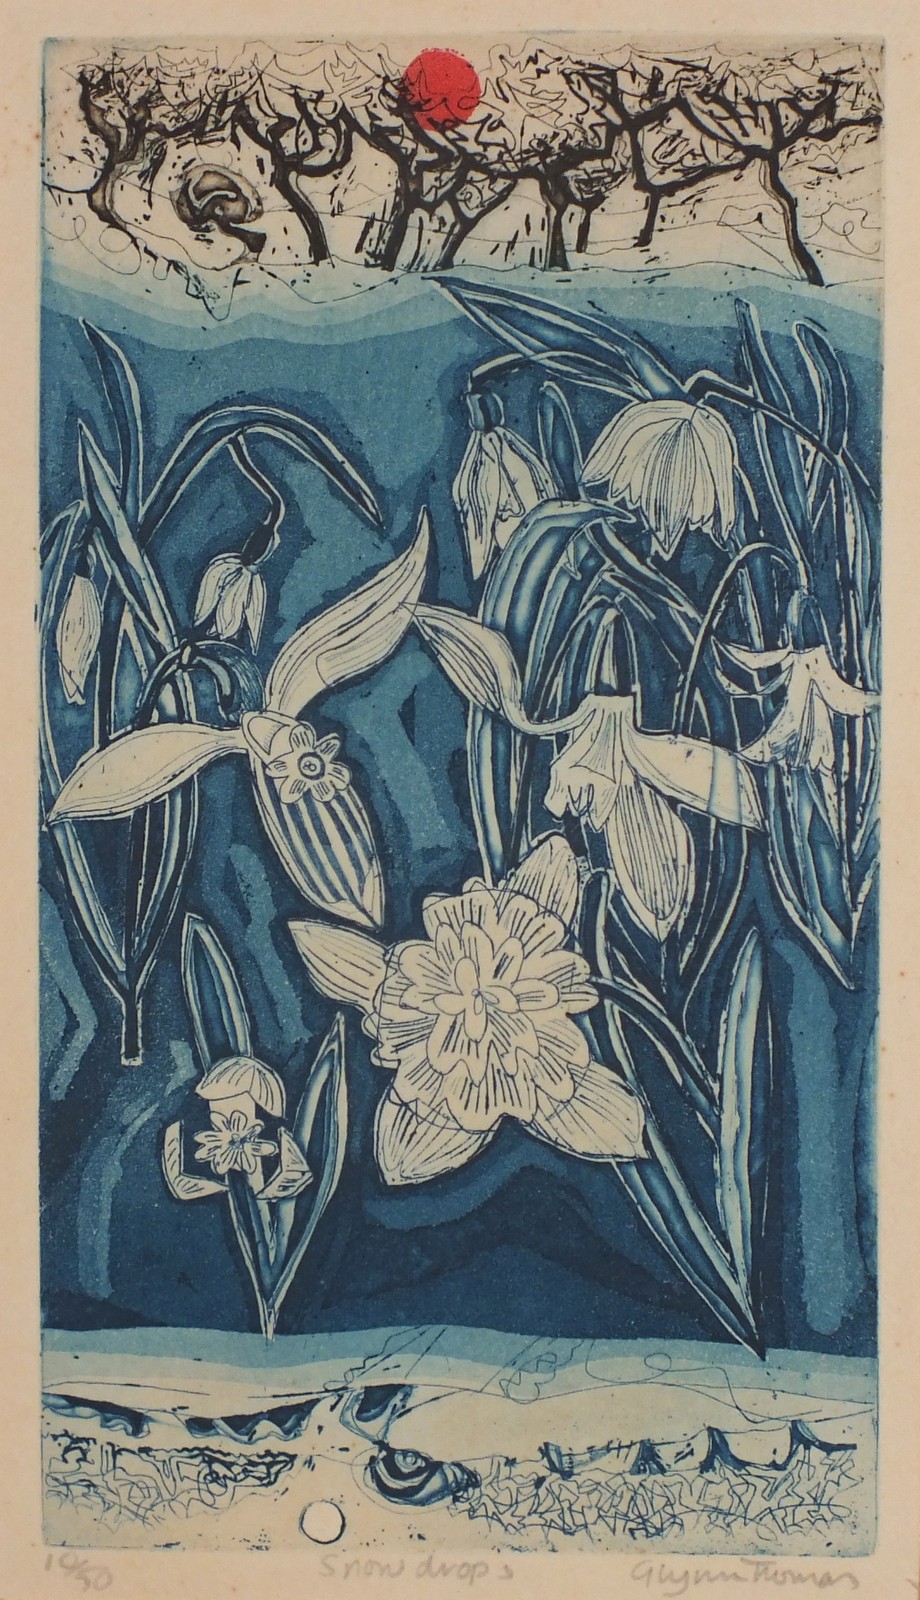 Glynn THOMAS (British b. 1946) Snow Drops, Coloured etching, Signed lower right, inscribed and